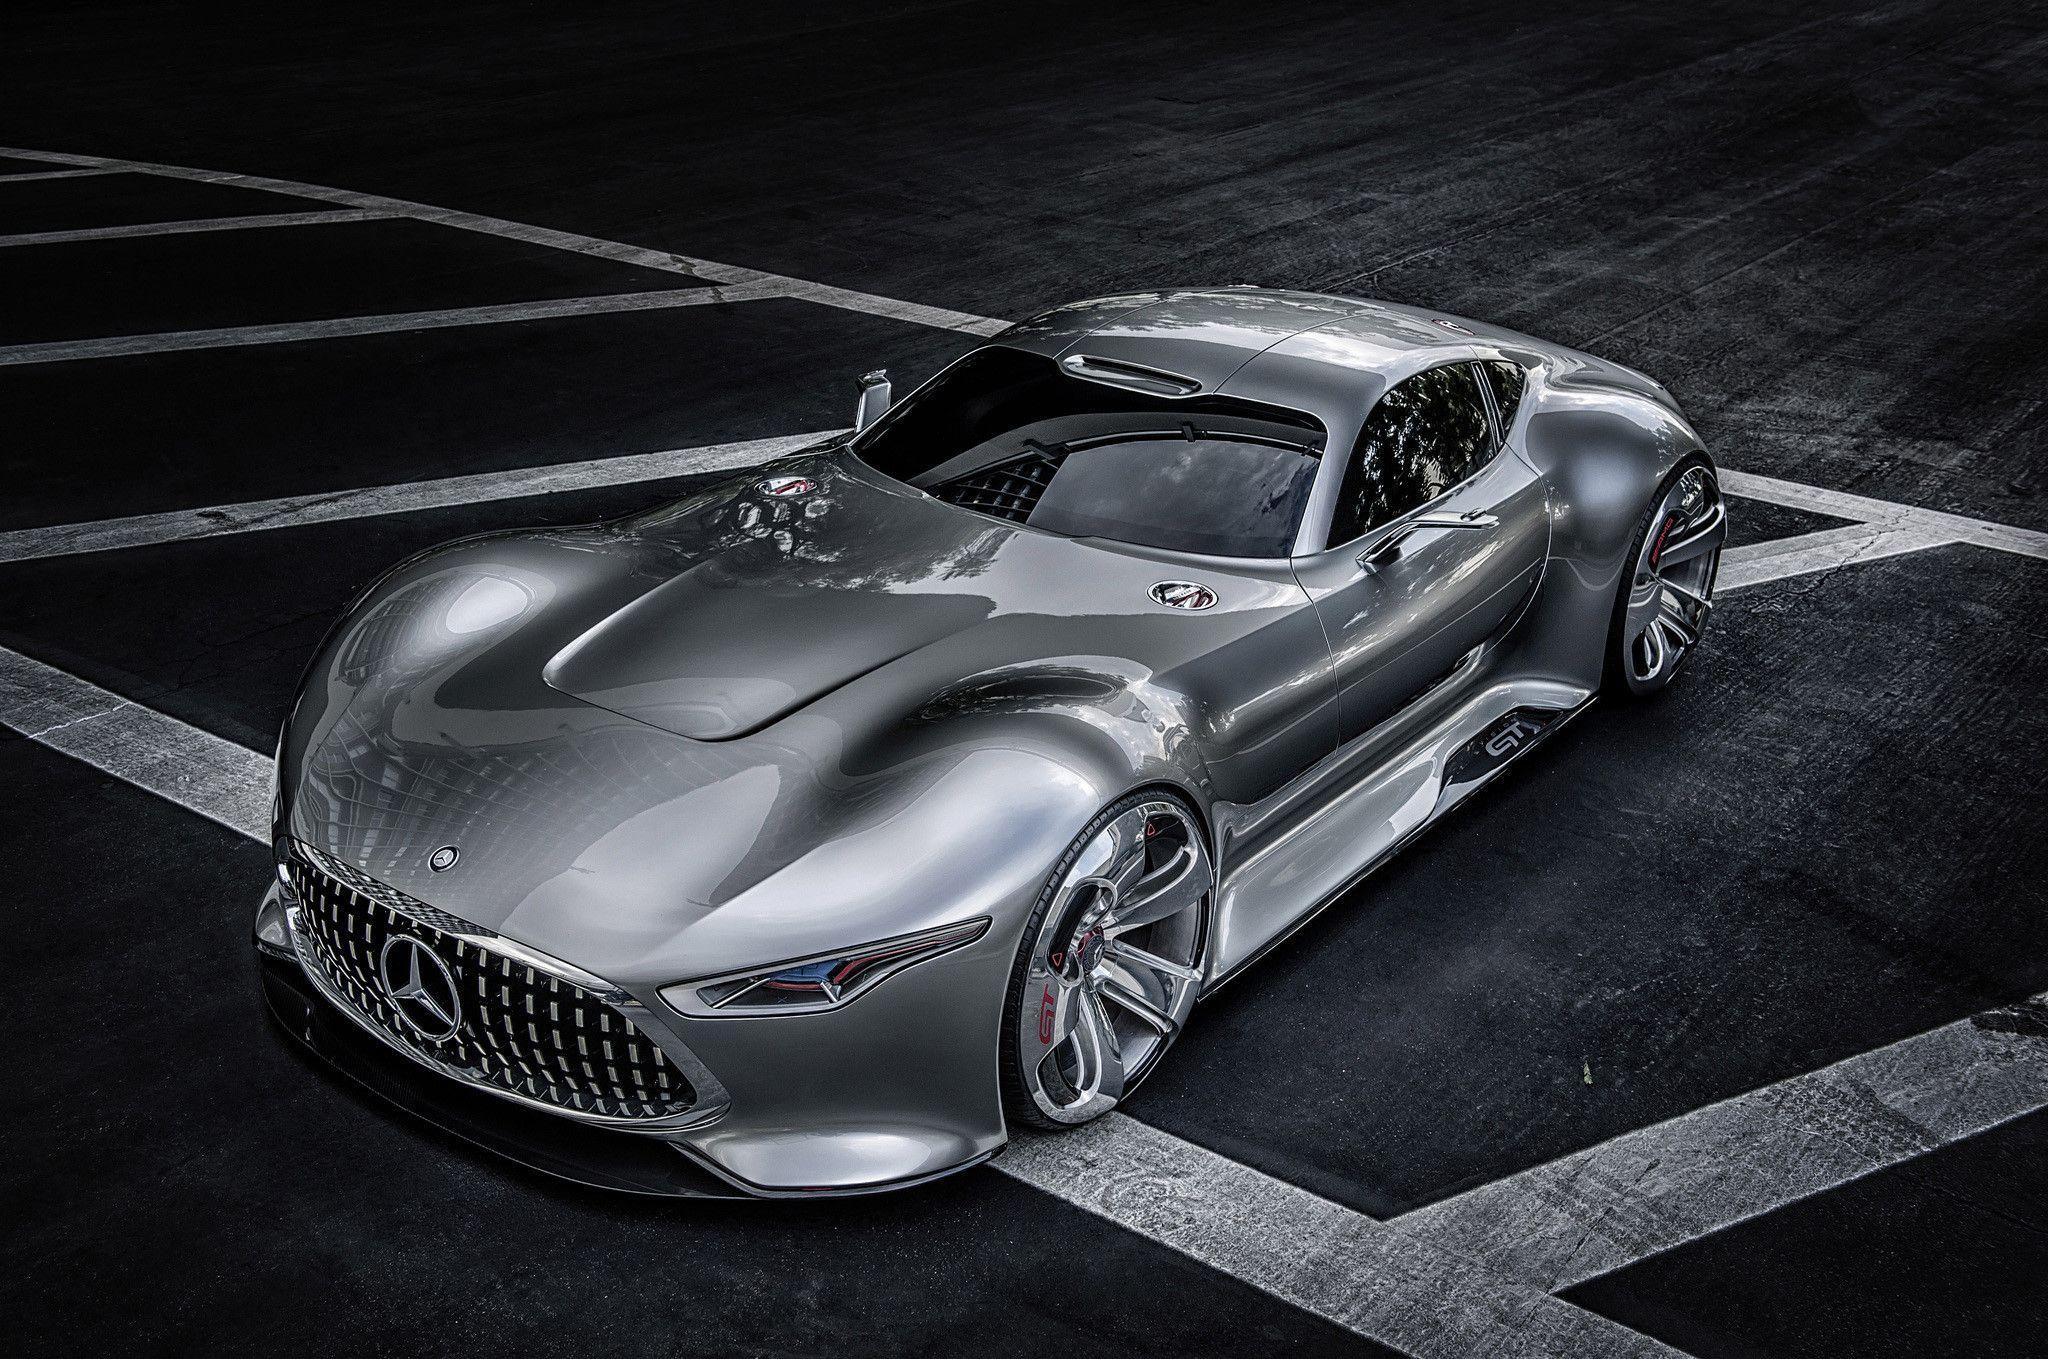 Mercedes Benz AMG Vision GT Wallpaper Wide Or HD. Cars